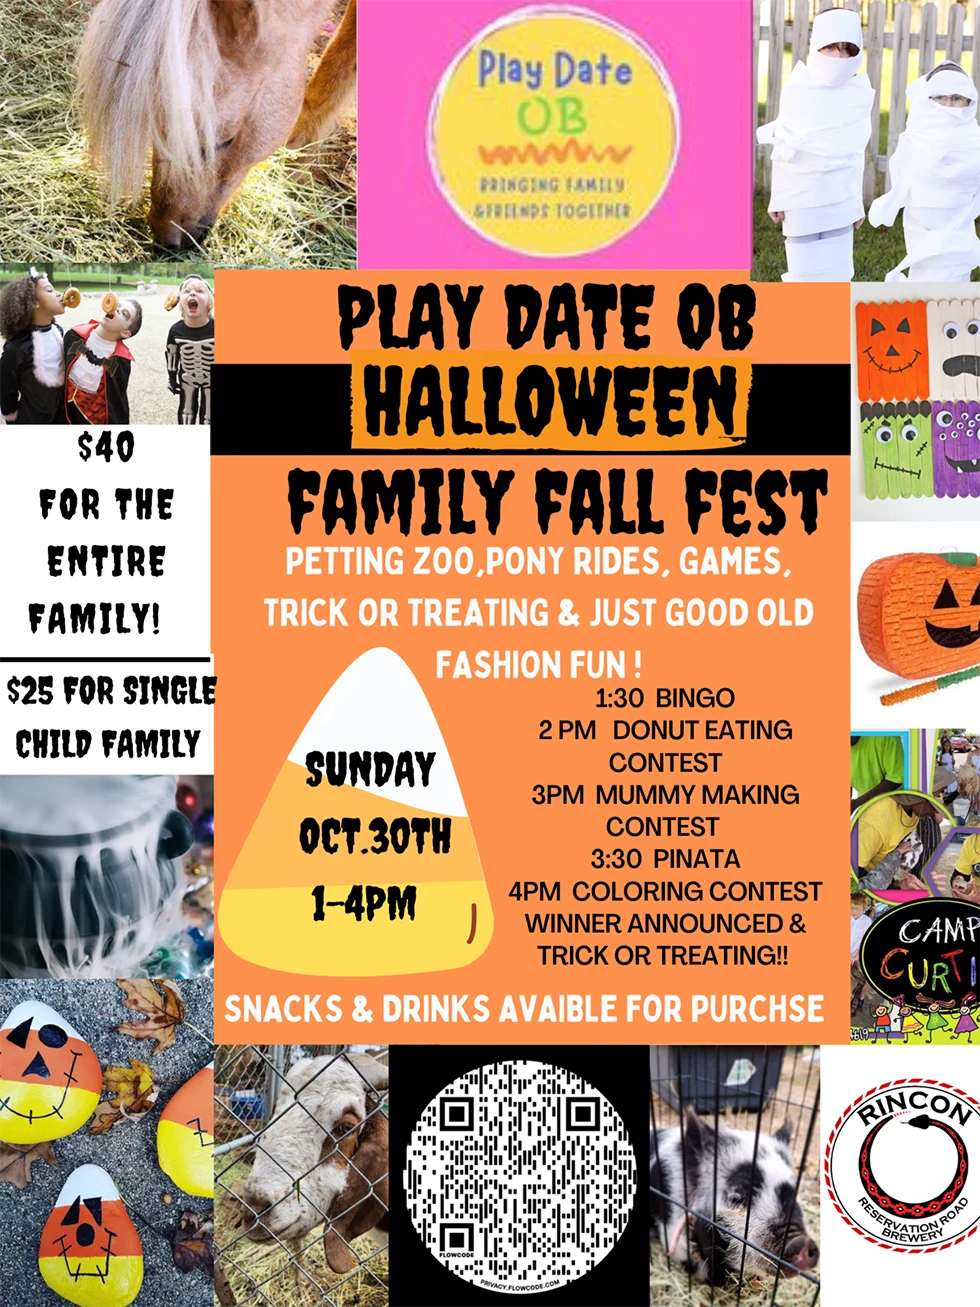 Ocean Beach Halloween Family Fall Festival by Play Date OB and Rincon Reservation